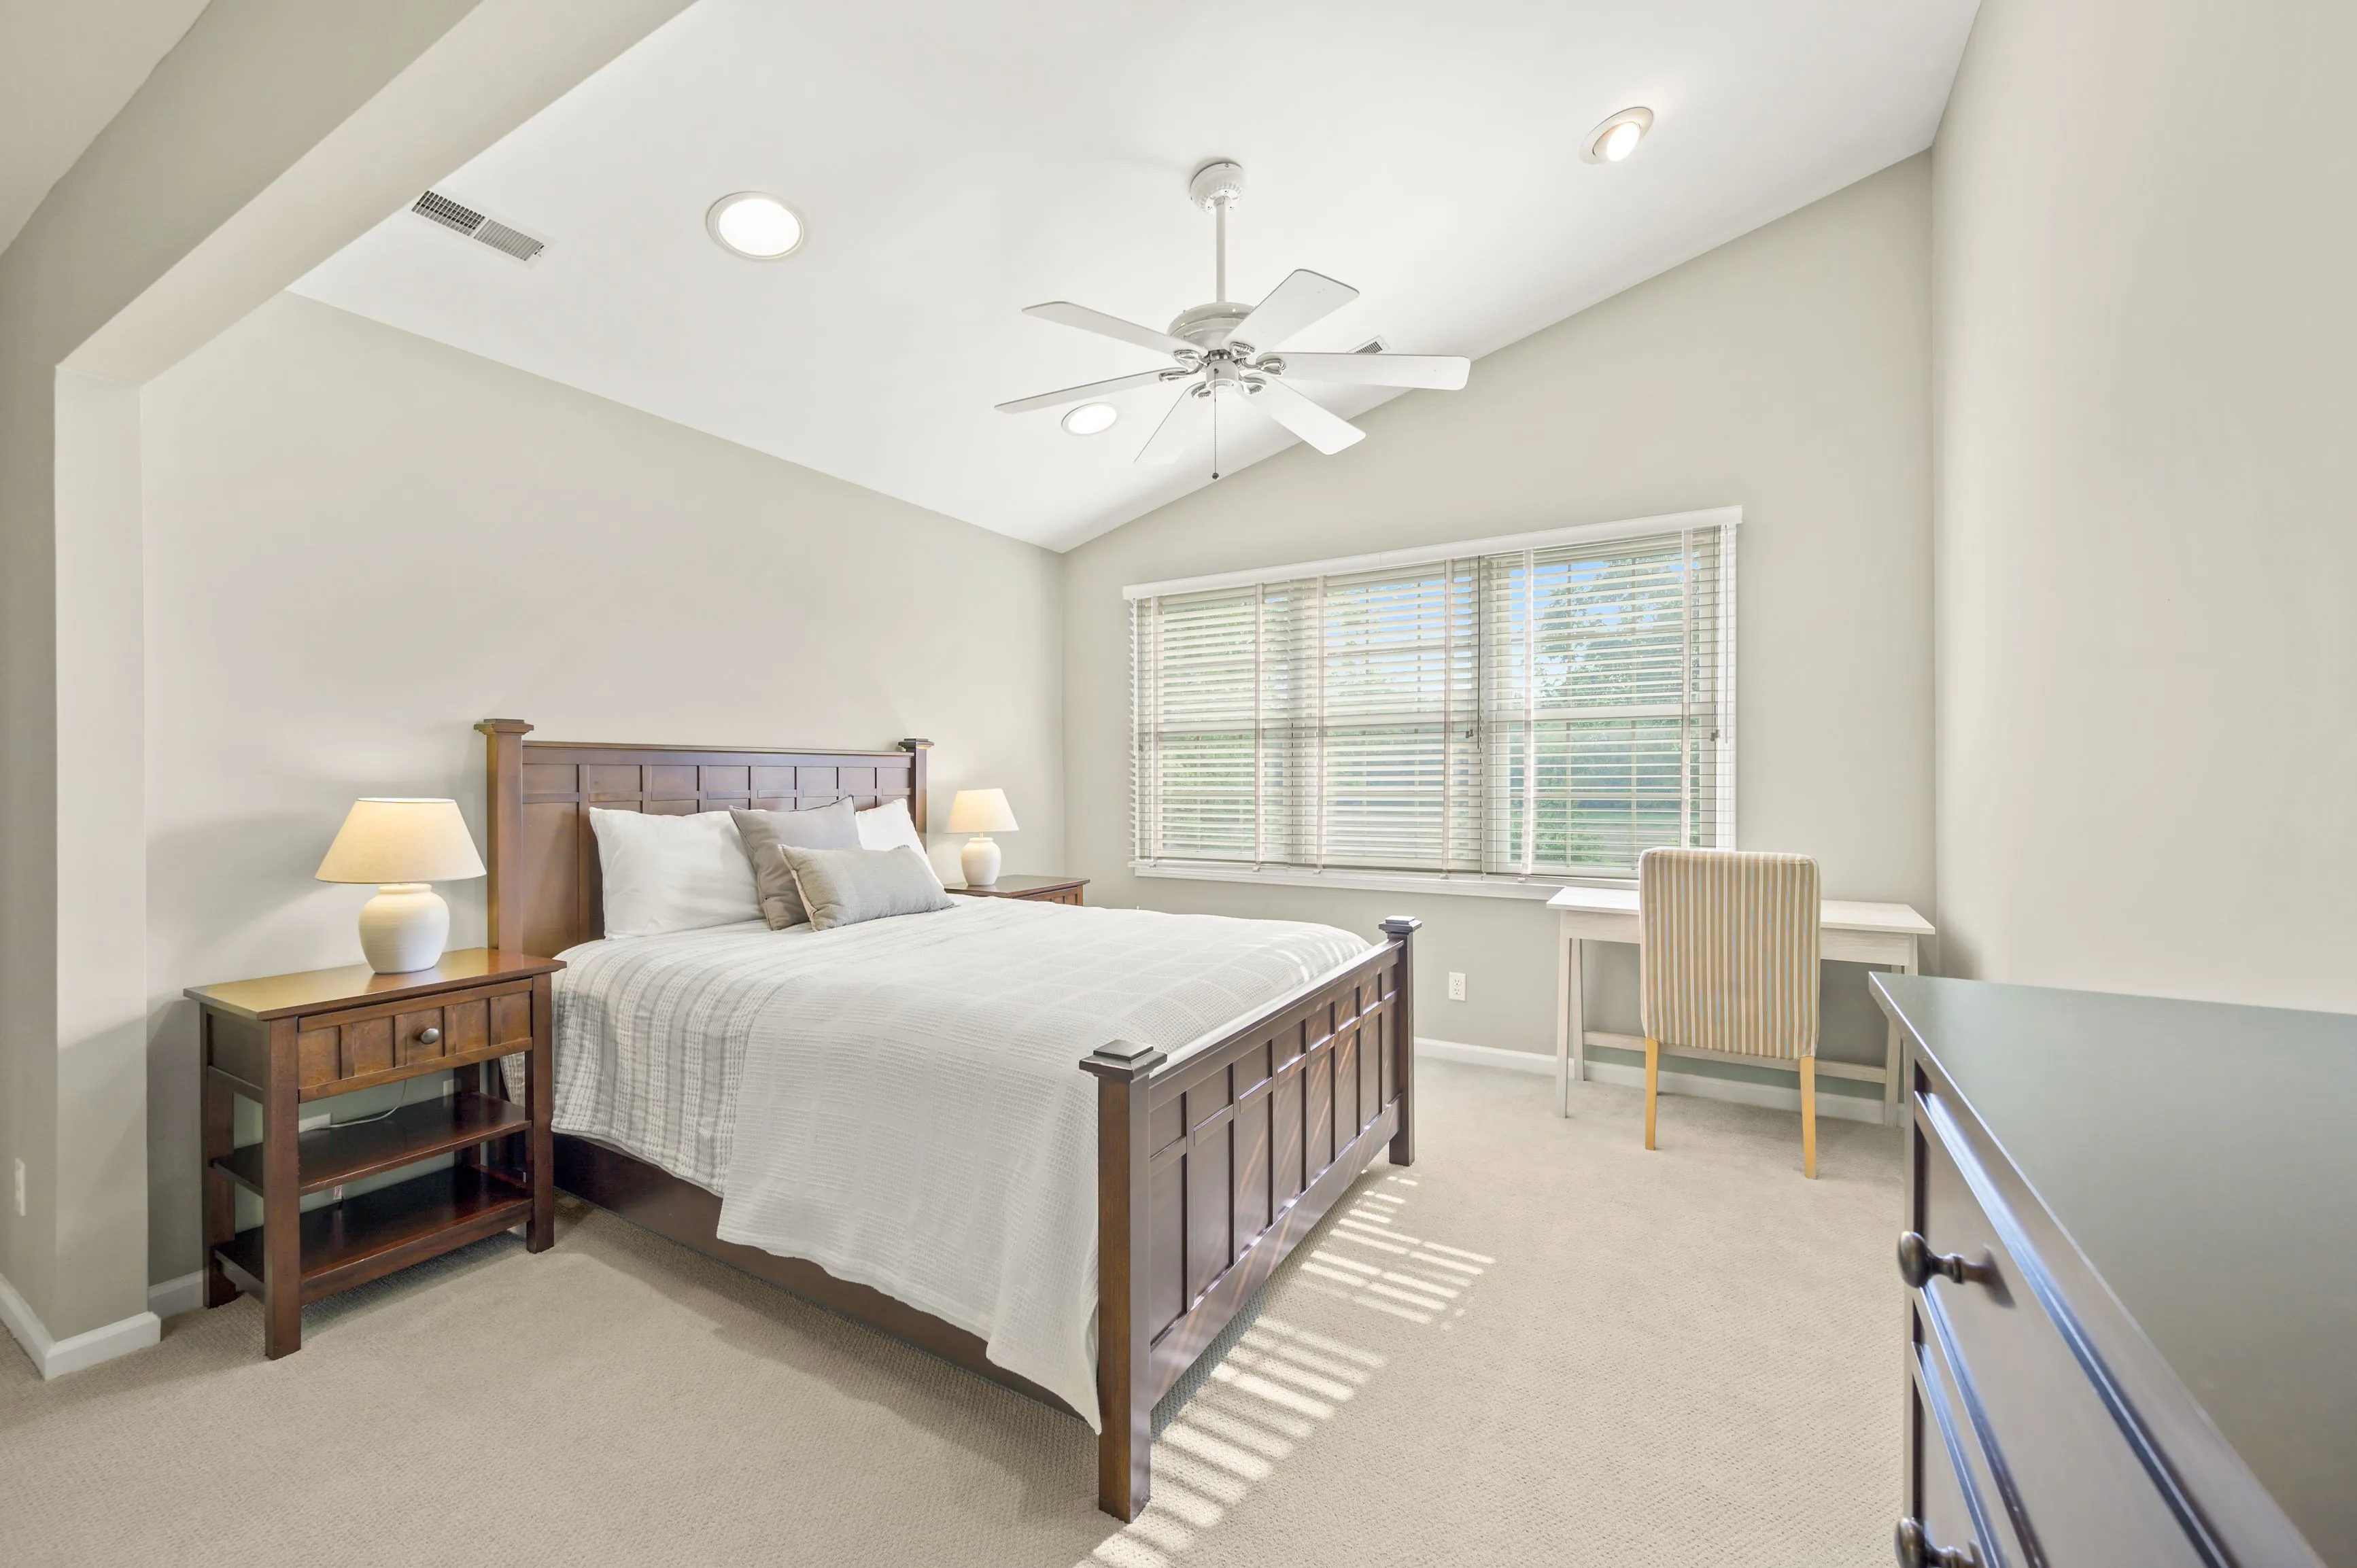 Bright spacious bedroom with a king-sized bed, large windows, and a ceiling fan.